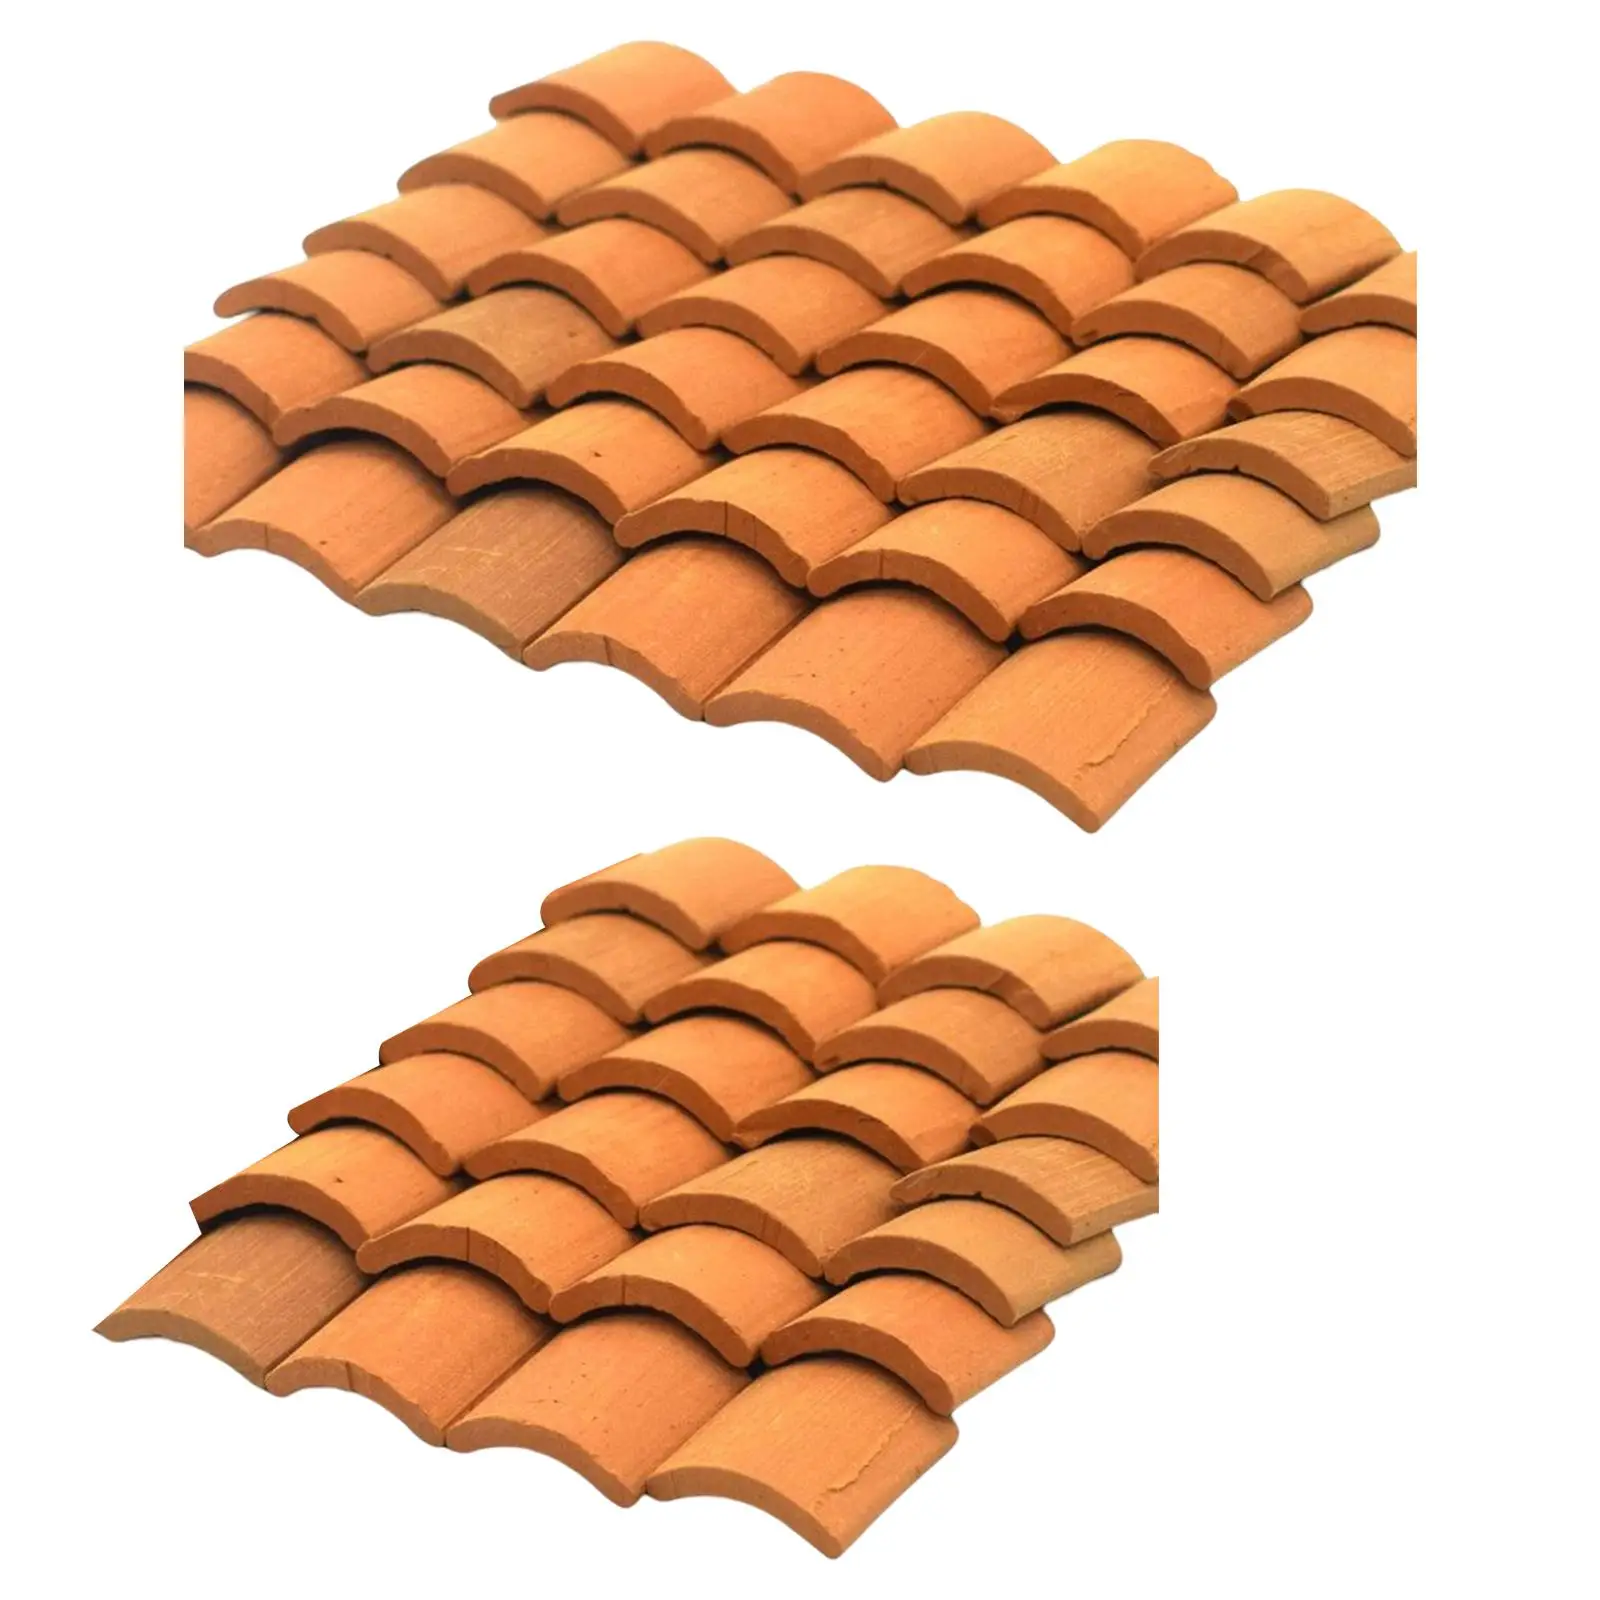 60 Pcs red Roof Tiles Dollhouse Scenery 1/16 for Dollhouses Living Room